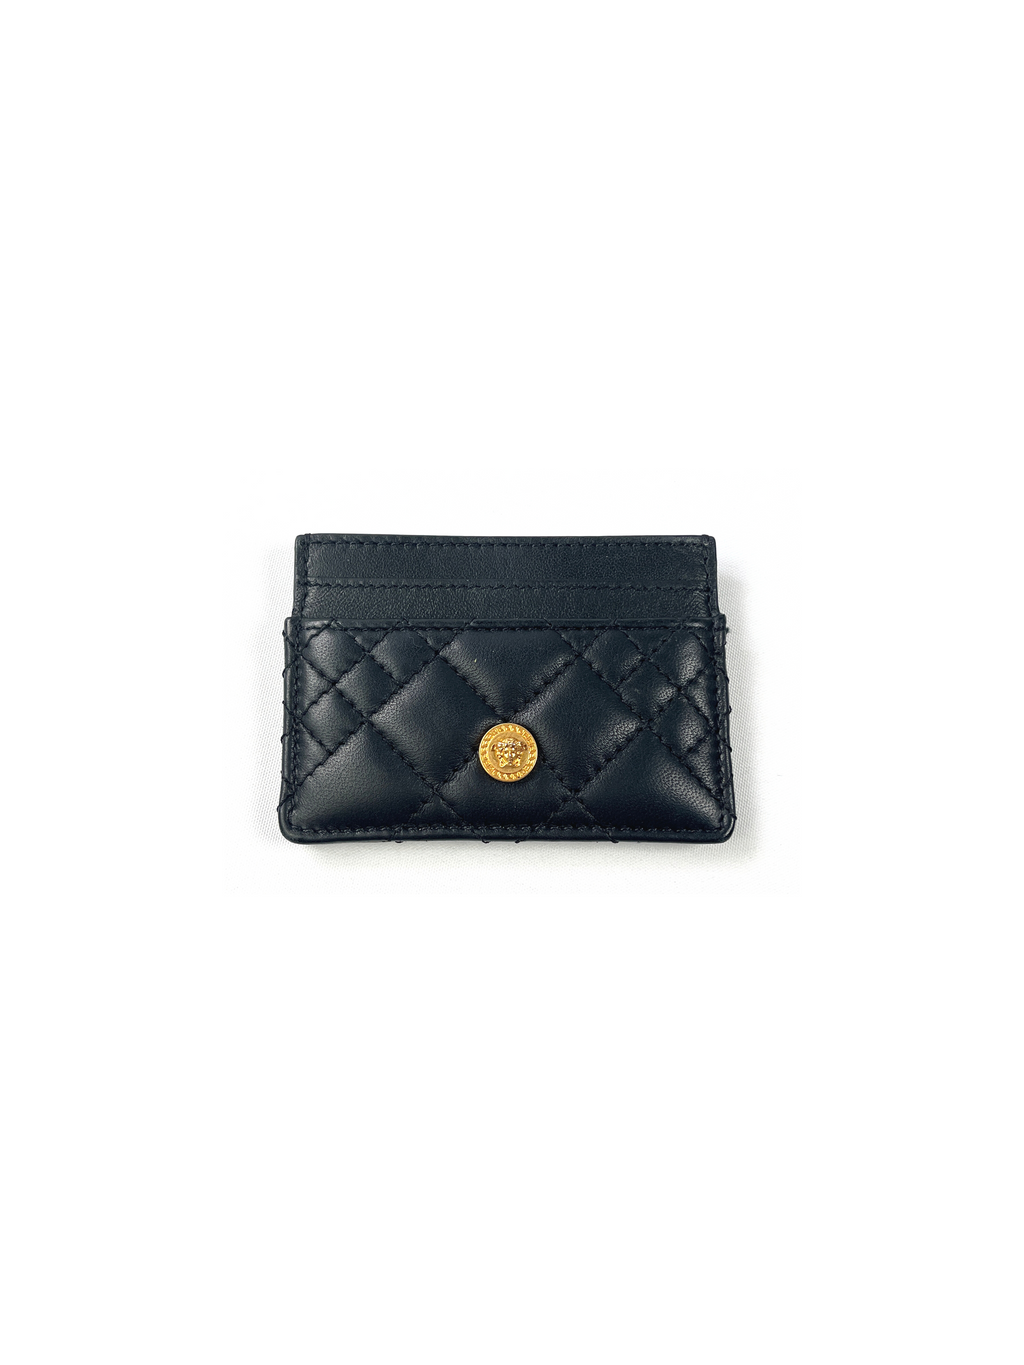 VERSACE - QUILTED LEATHER MEDUSA CARD HOLDER